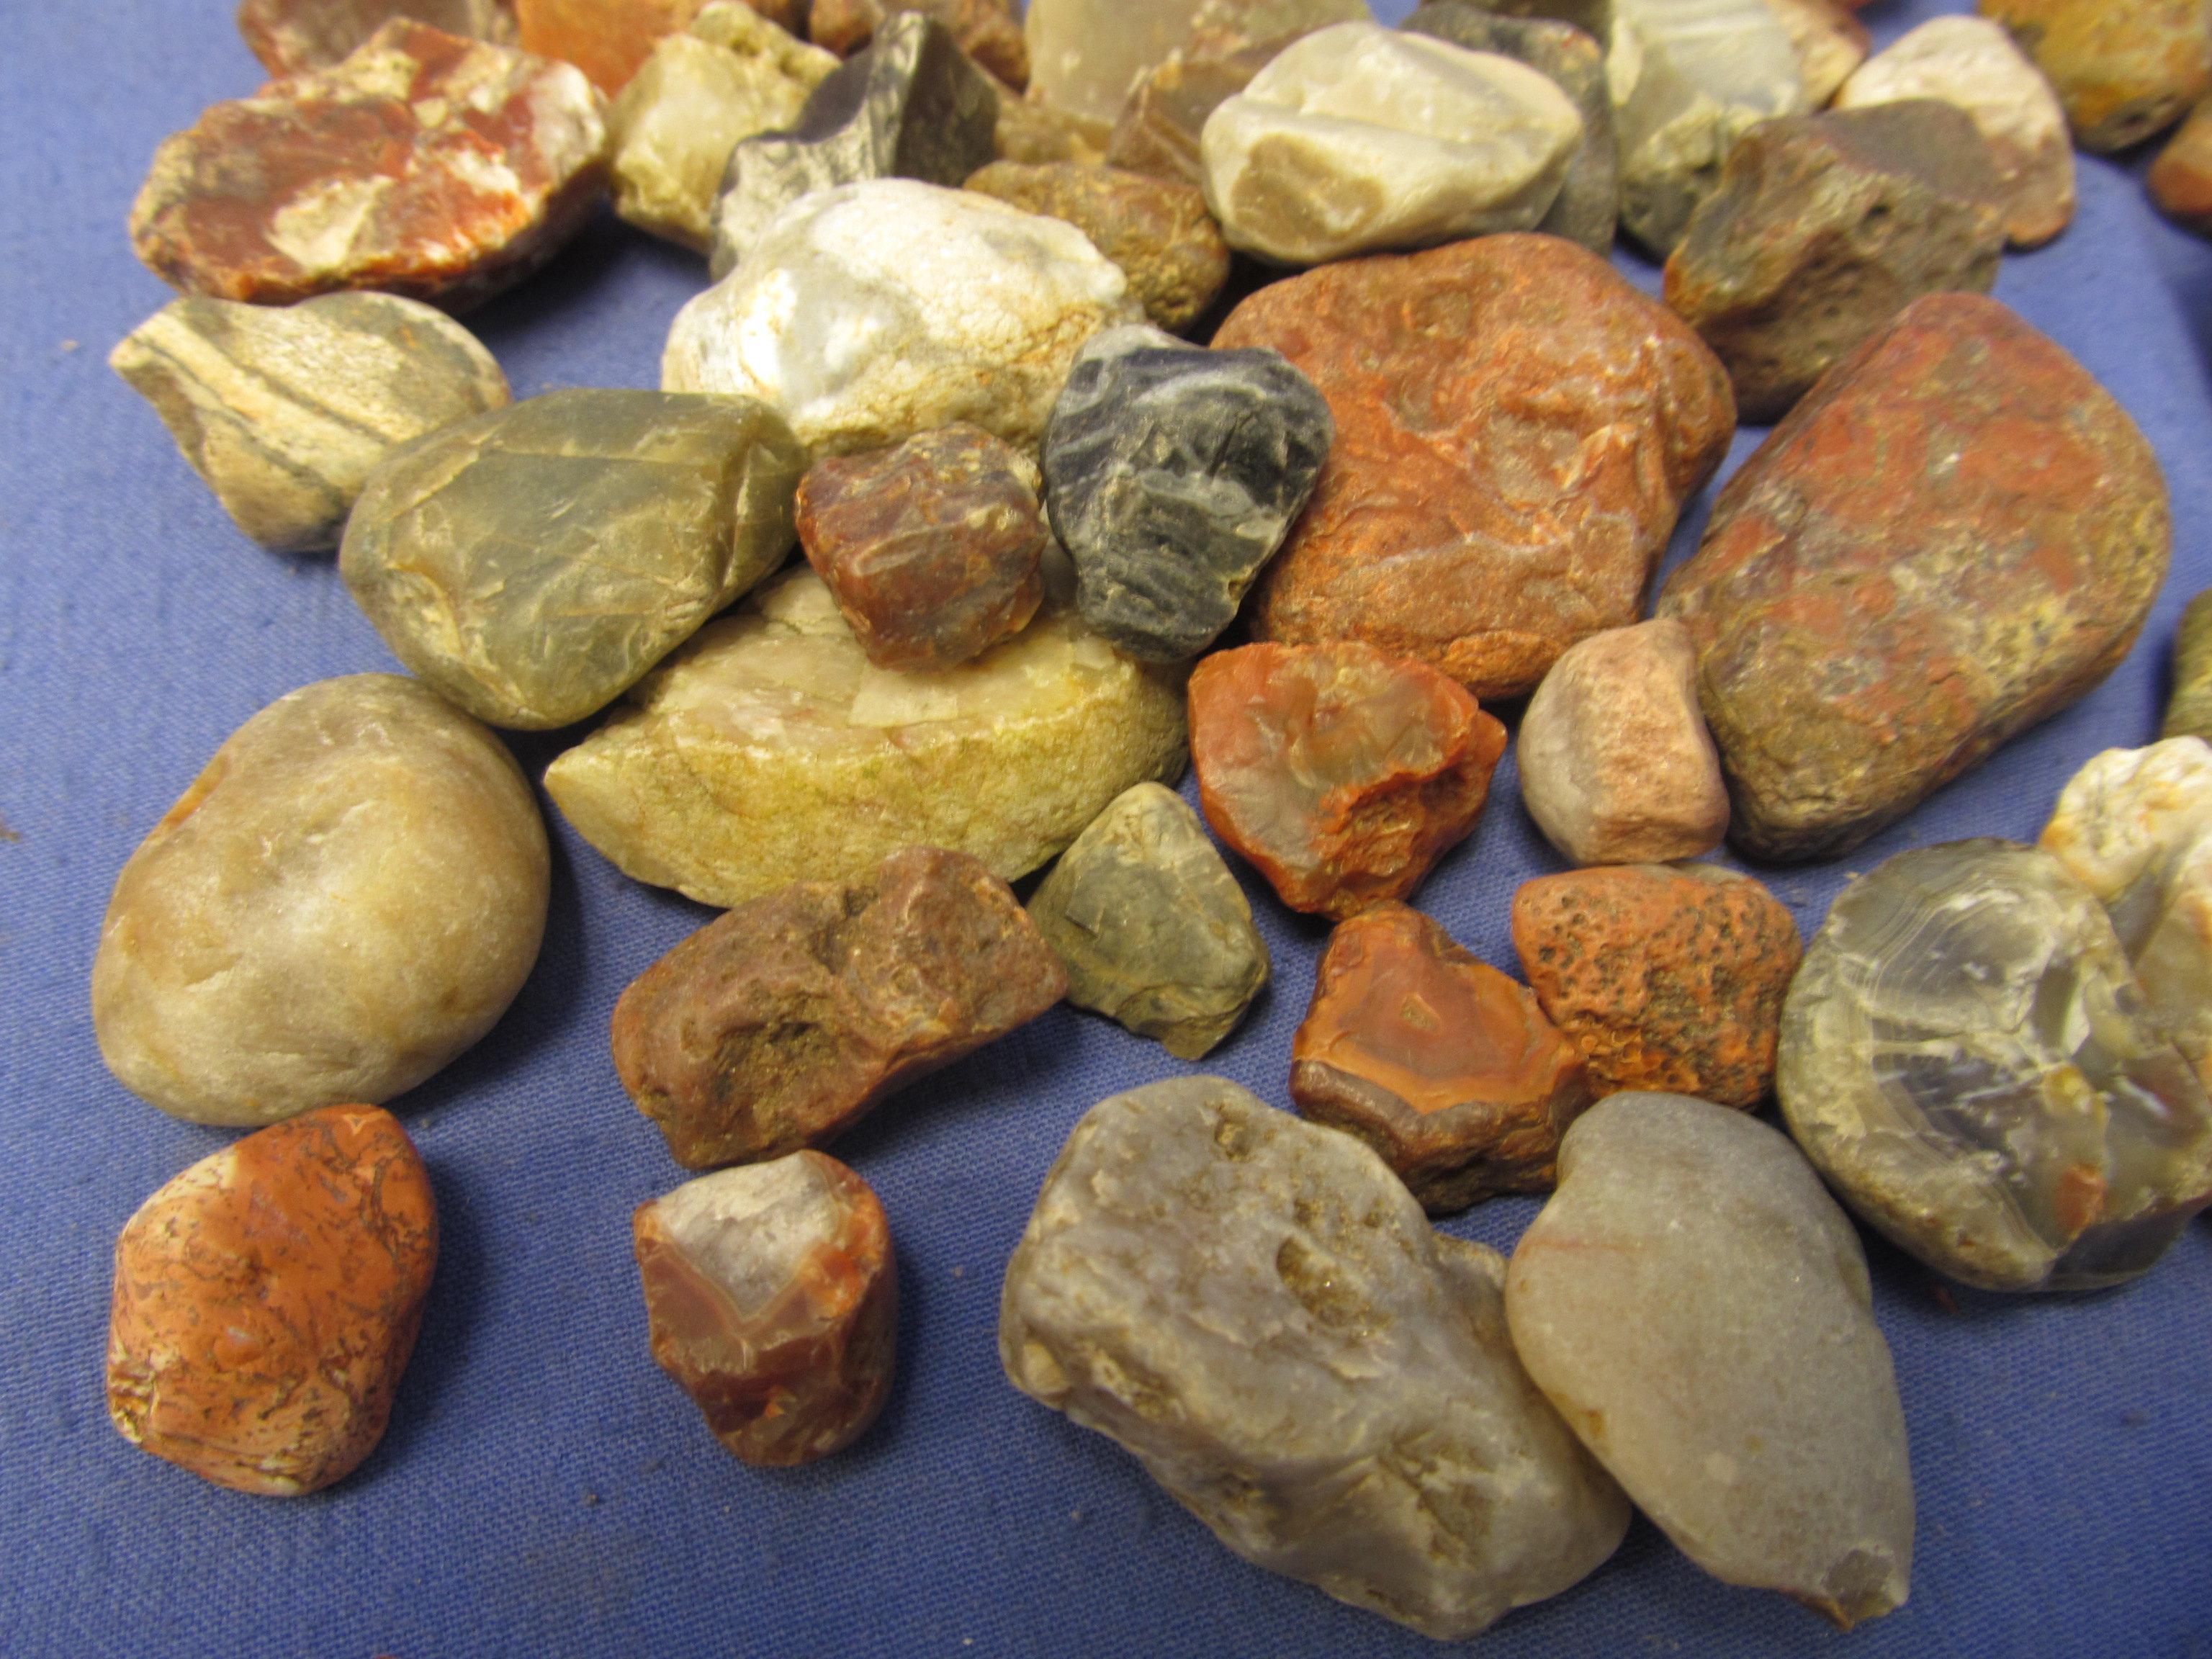 Raw Agates & Other Stones For Tumbling – Appx 2 Lbs